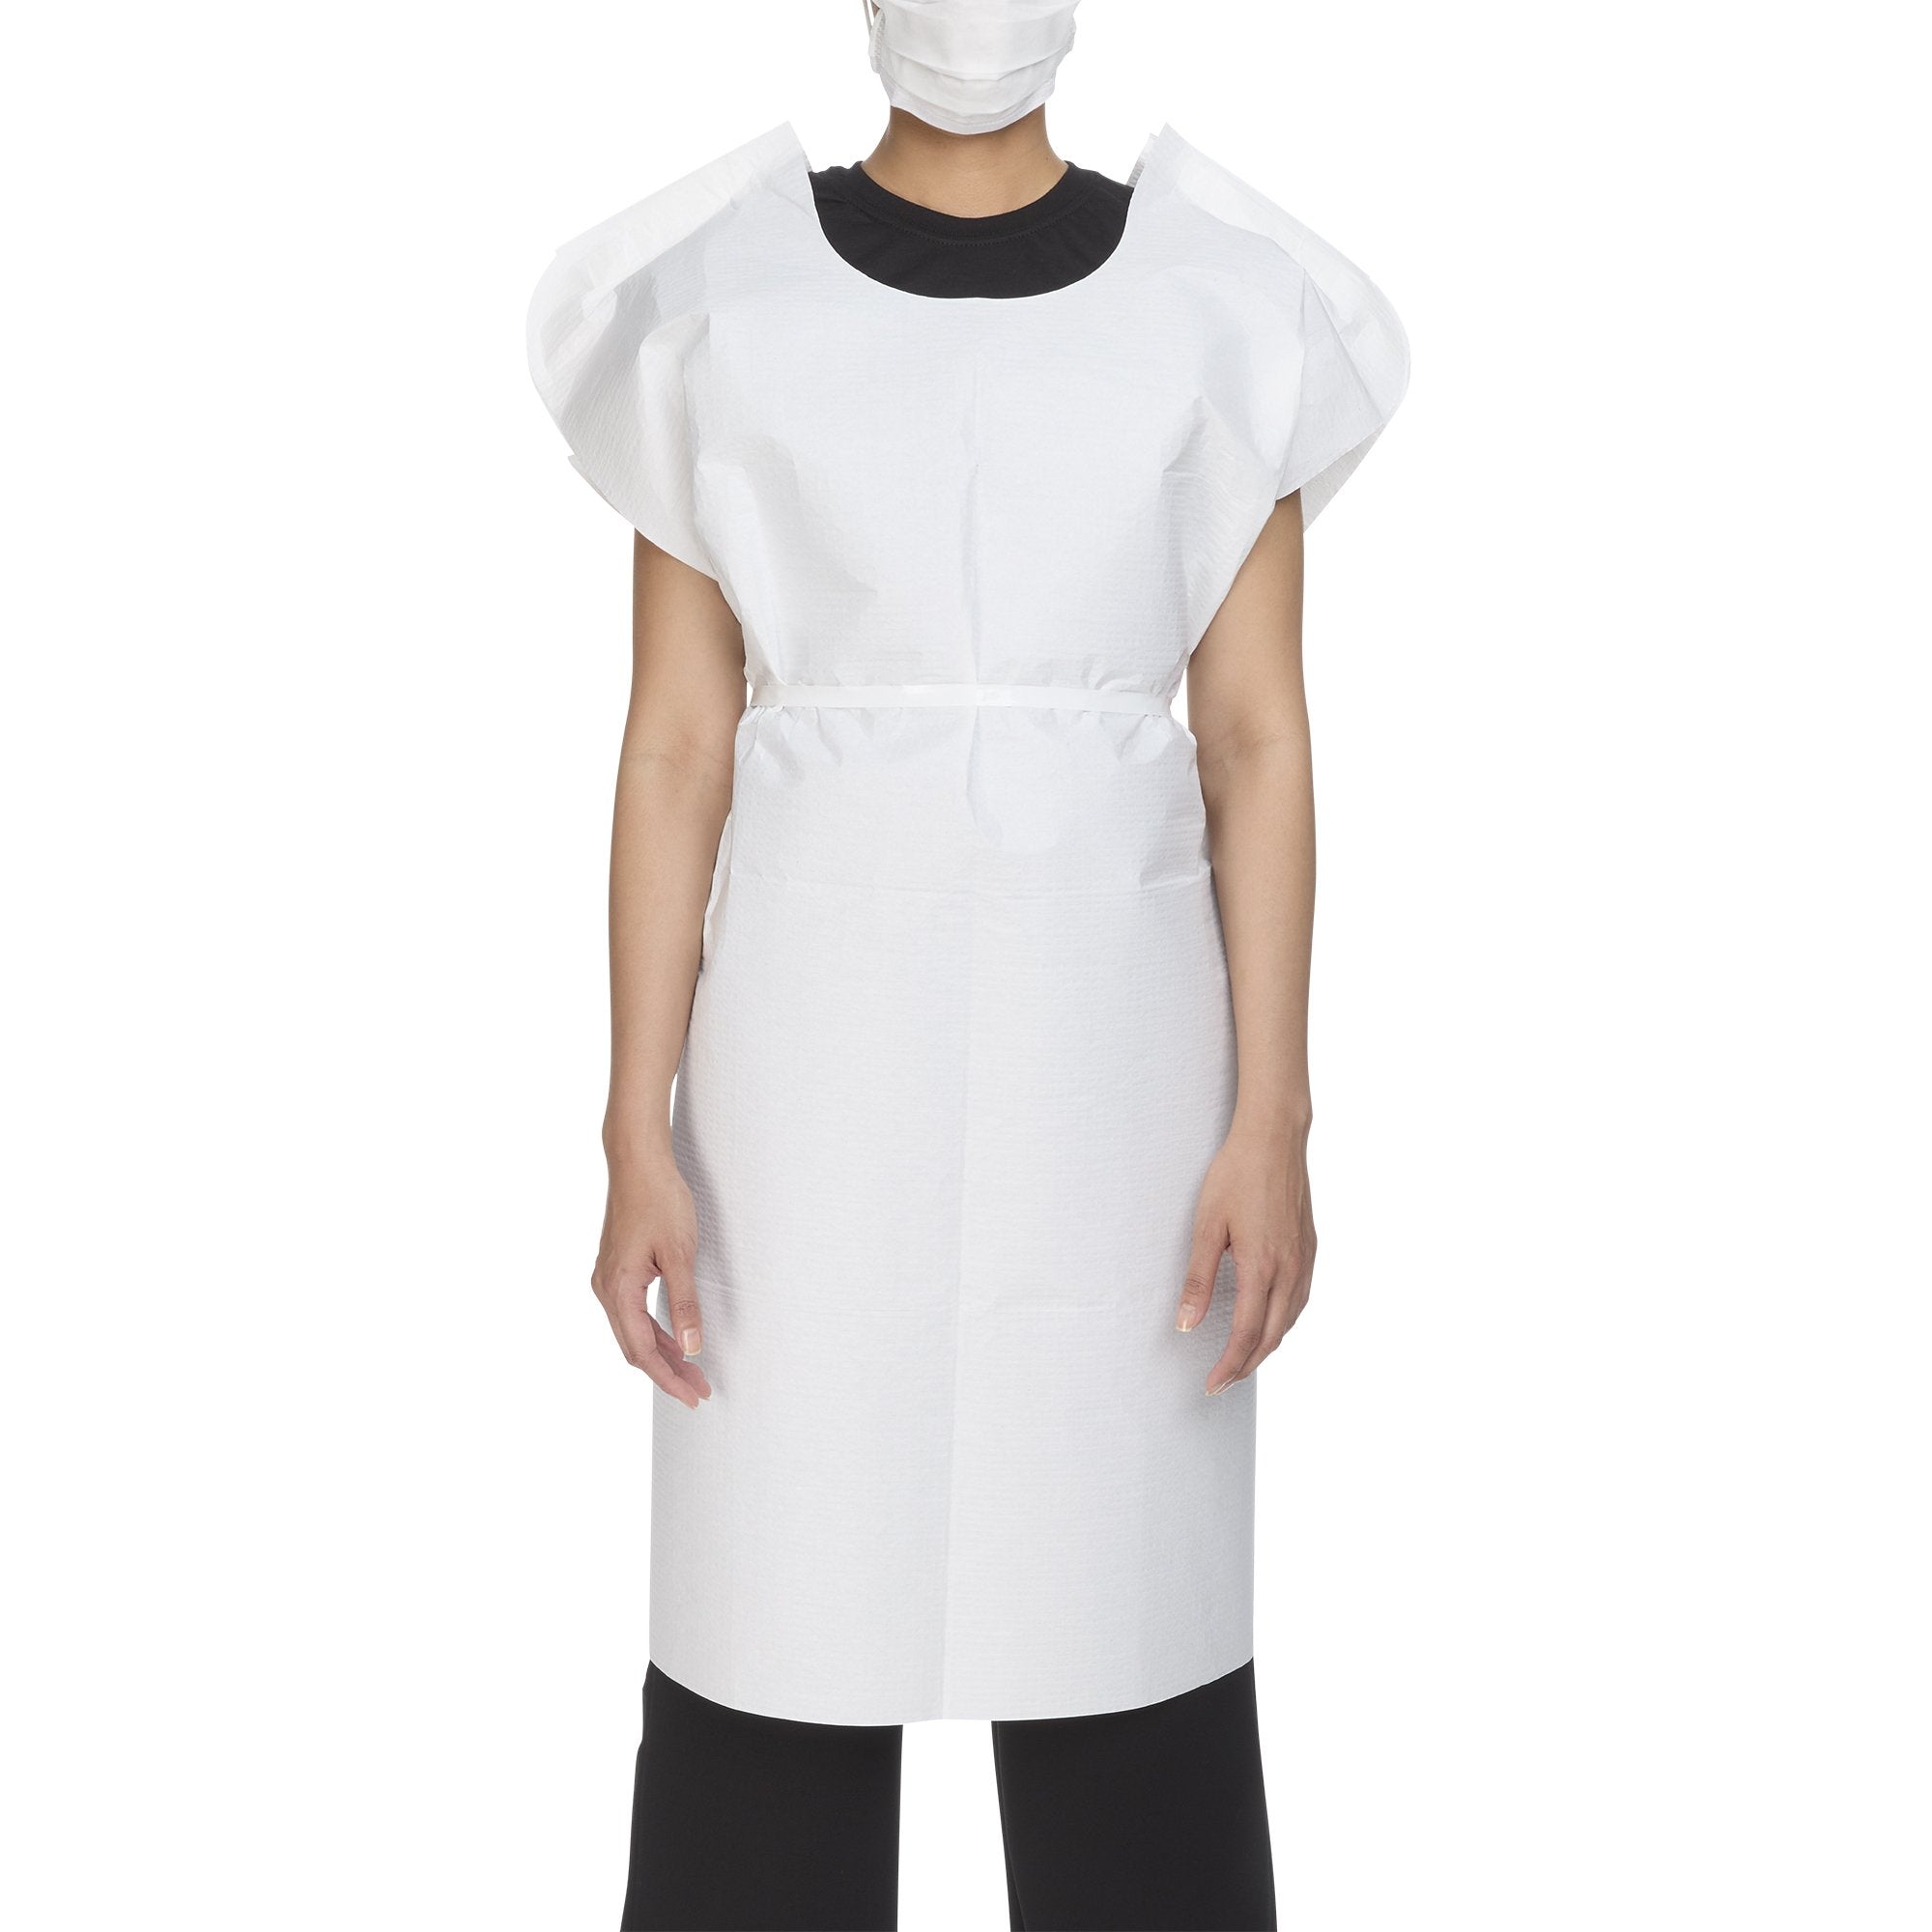 McKesson Deluxe Patient Exam Gown, One Size Fits Most, White -Case of 50